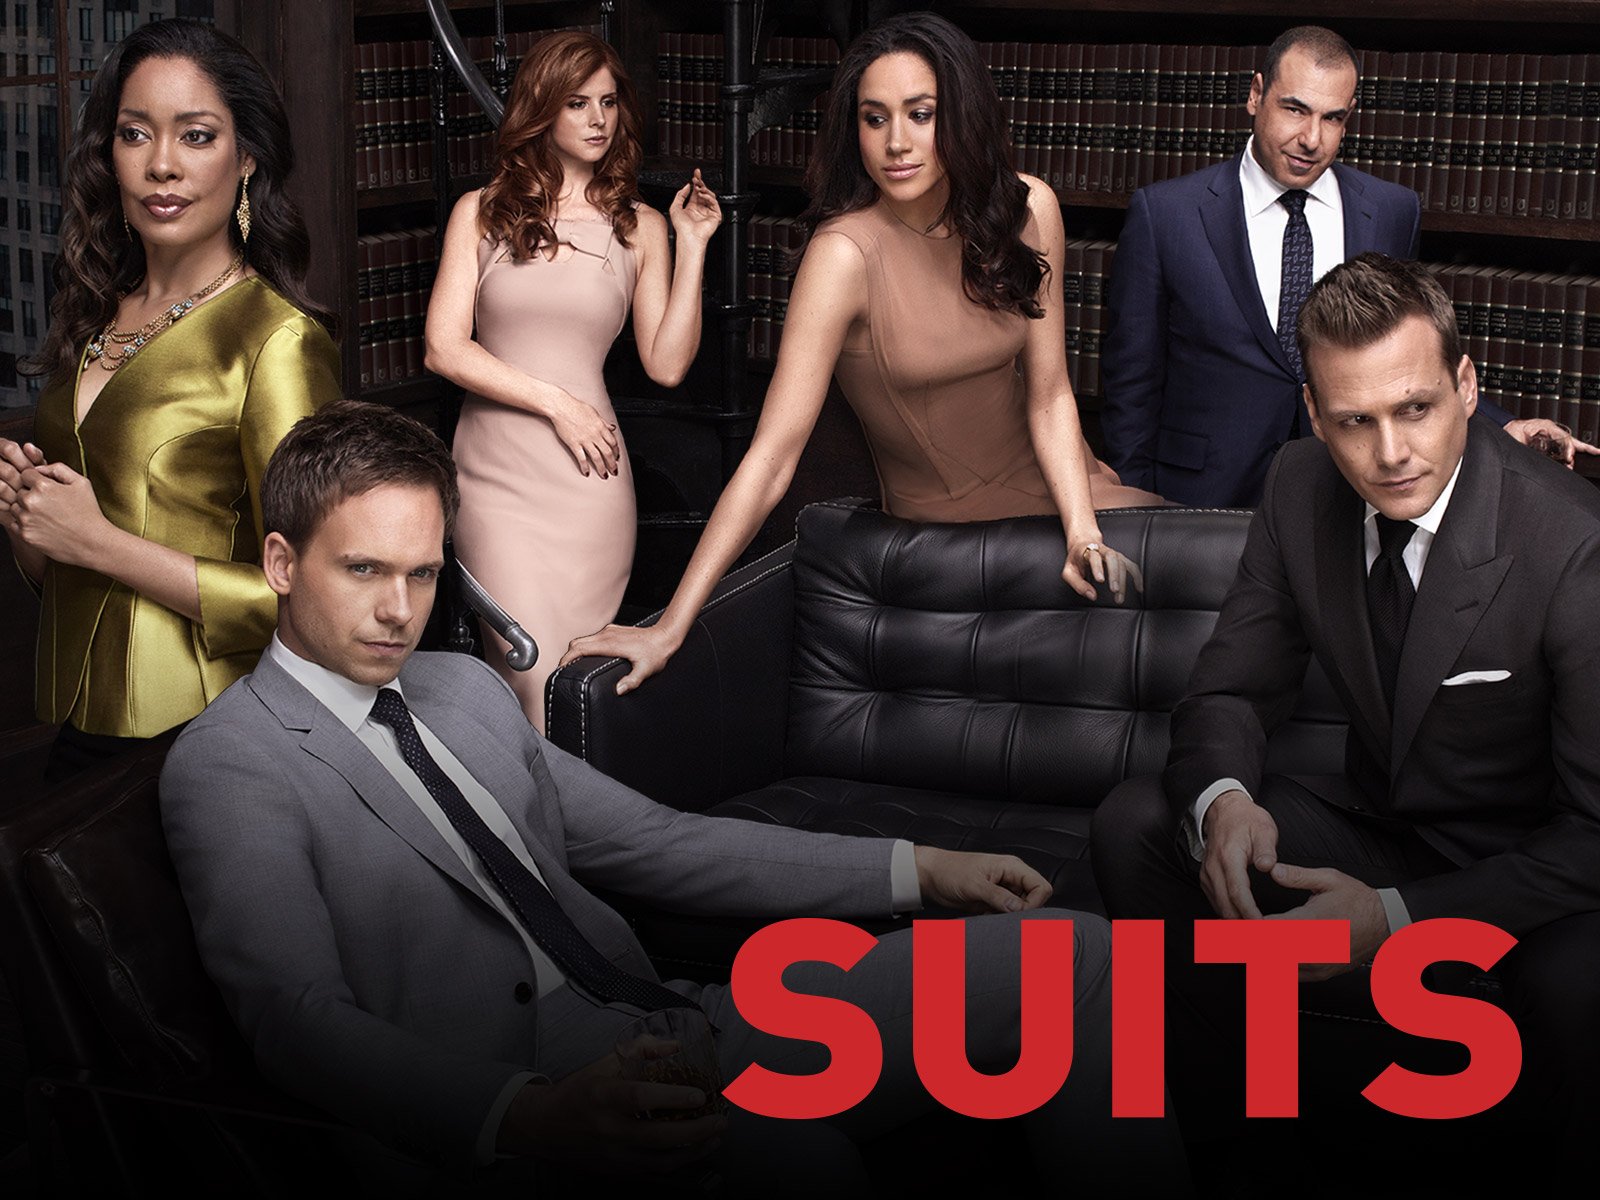 Random Thoughts About the Show Suits - Lecky Bang